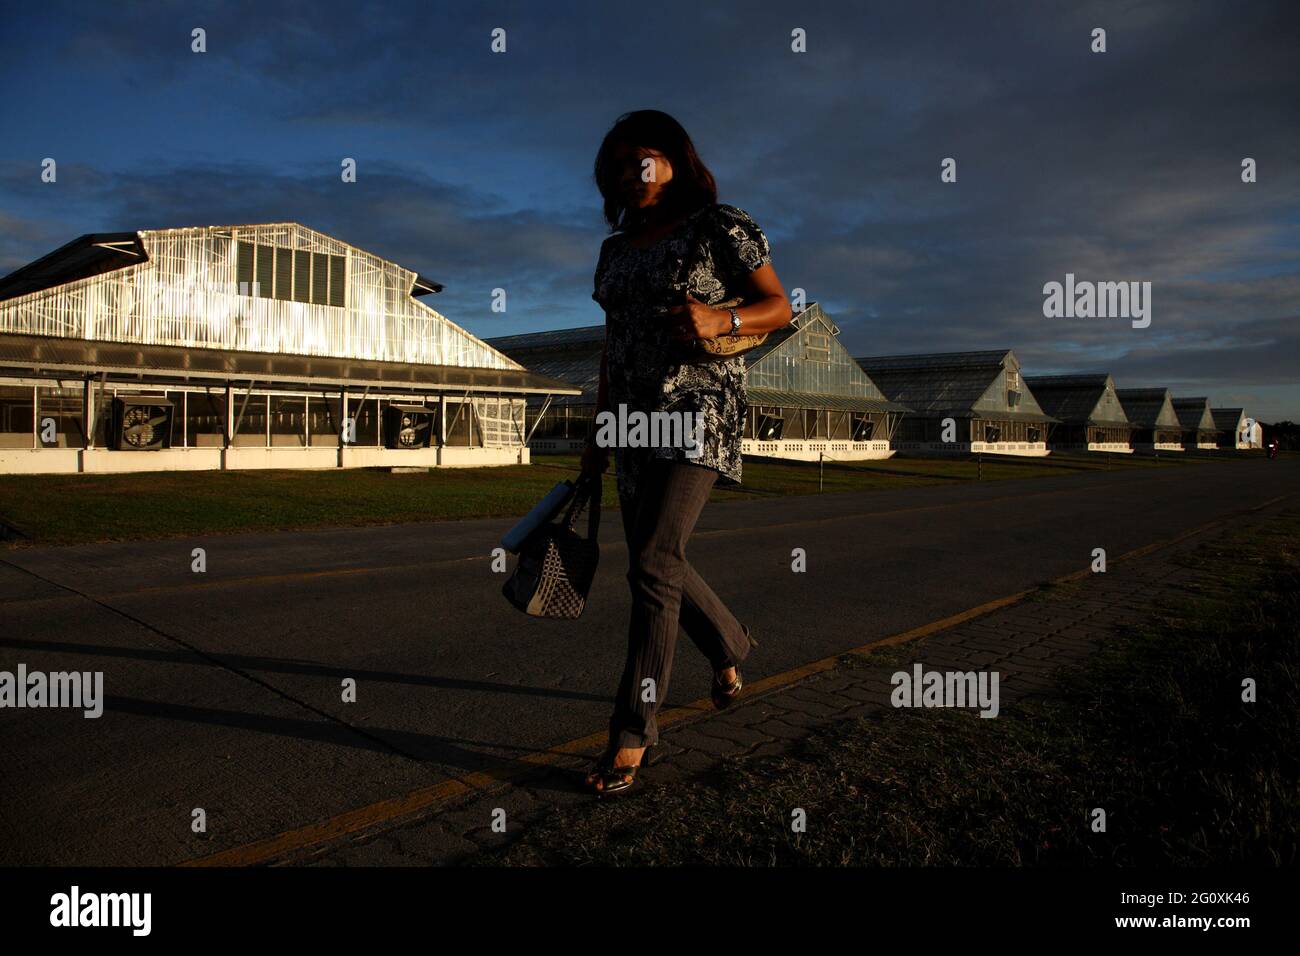 A worker walking by the greenhouses at the International Rice Research Institute (IRRI) at Los Baños, Philippines, at sunset. Stock Photo